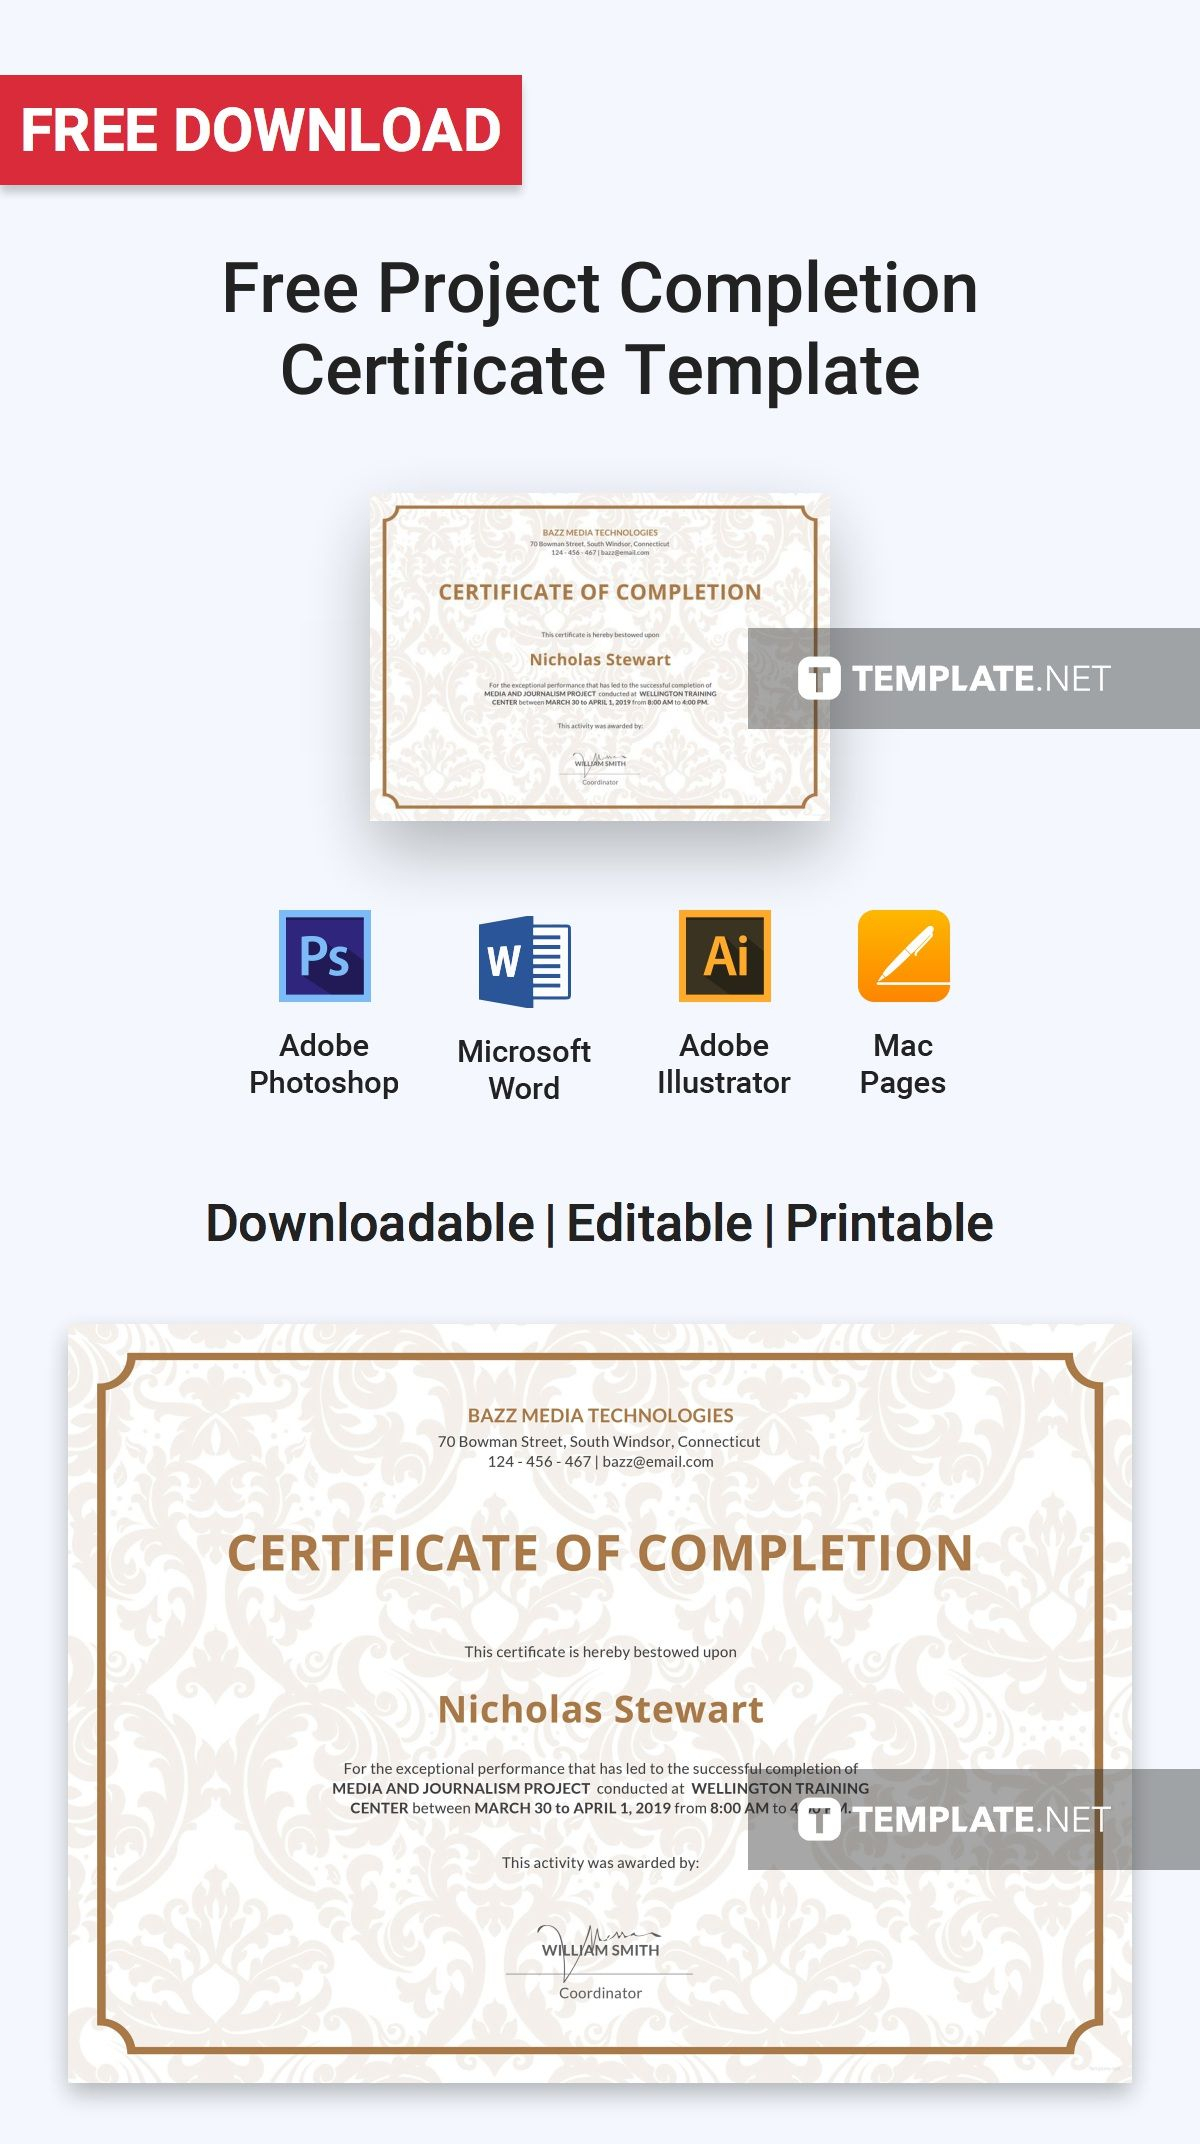 Free Project Completion Certificate | Certificate Templates Pertaining To Certificate Template For Project Completion